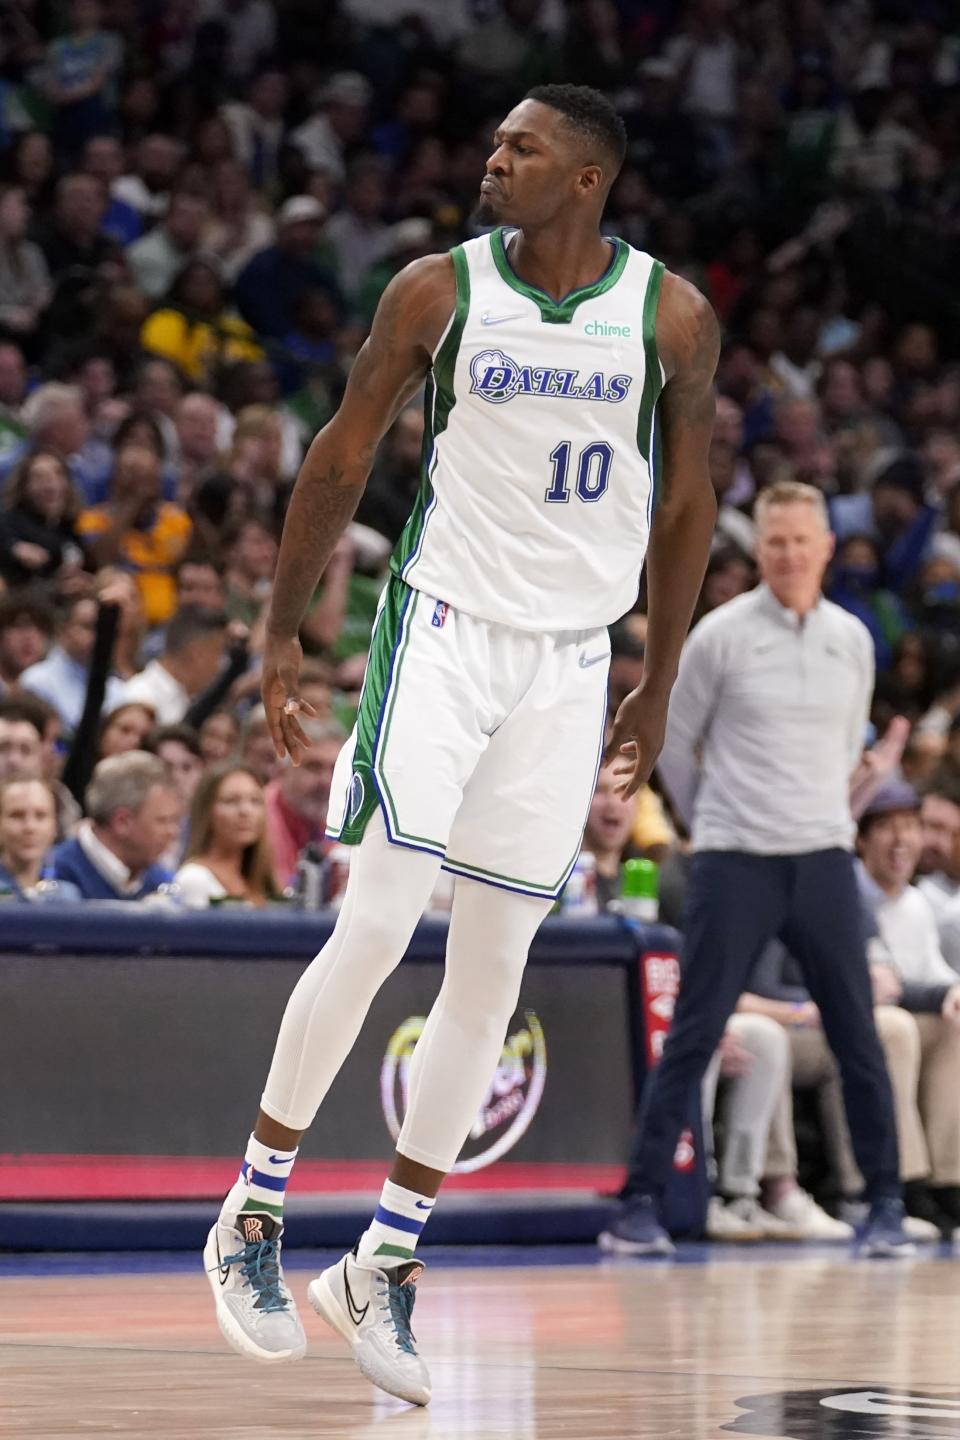 Dallas Mavericks forward Dorian Finney-Smith celebrates after sinking a three-point basket in the first half of an NBA basketball game against the Golden State Warriors in Dallas, Thursday, March, 3, 2022. (AP Photo/Tony Gutierrez)